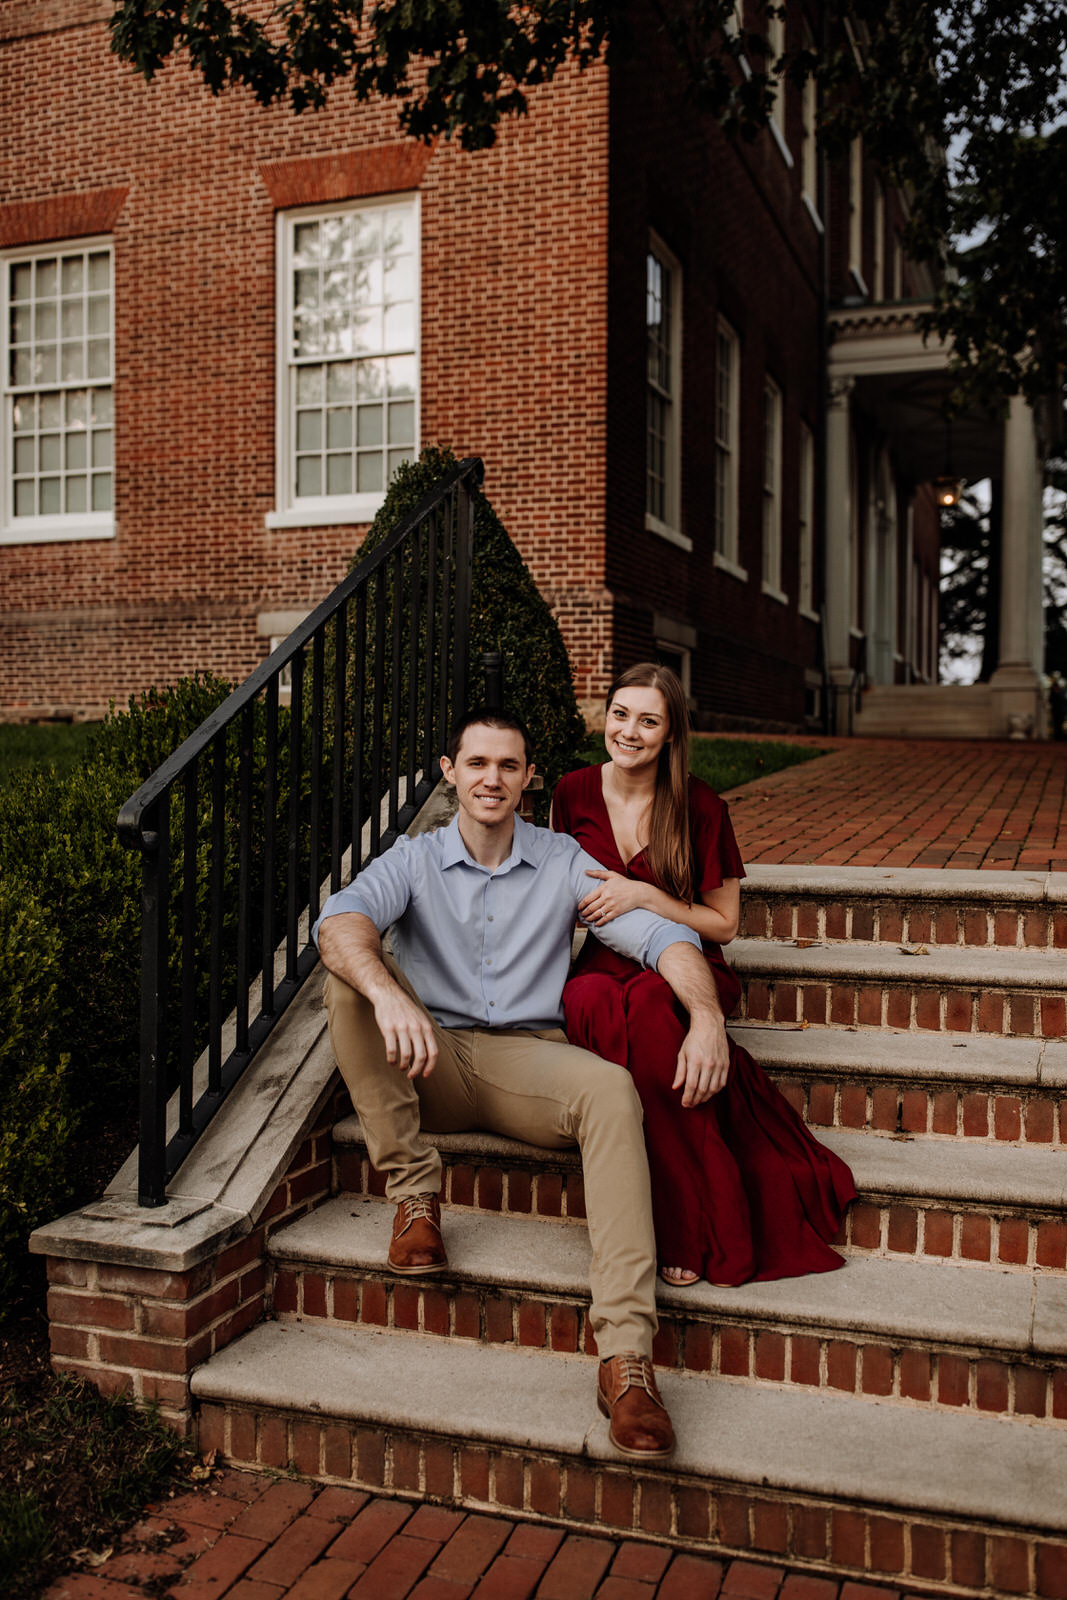 Man and woman looking at camera portrait - sitting on brick stairs in Annapolis, Maryland